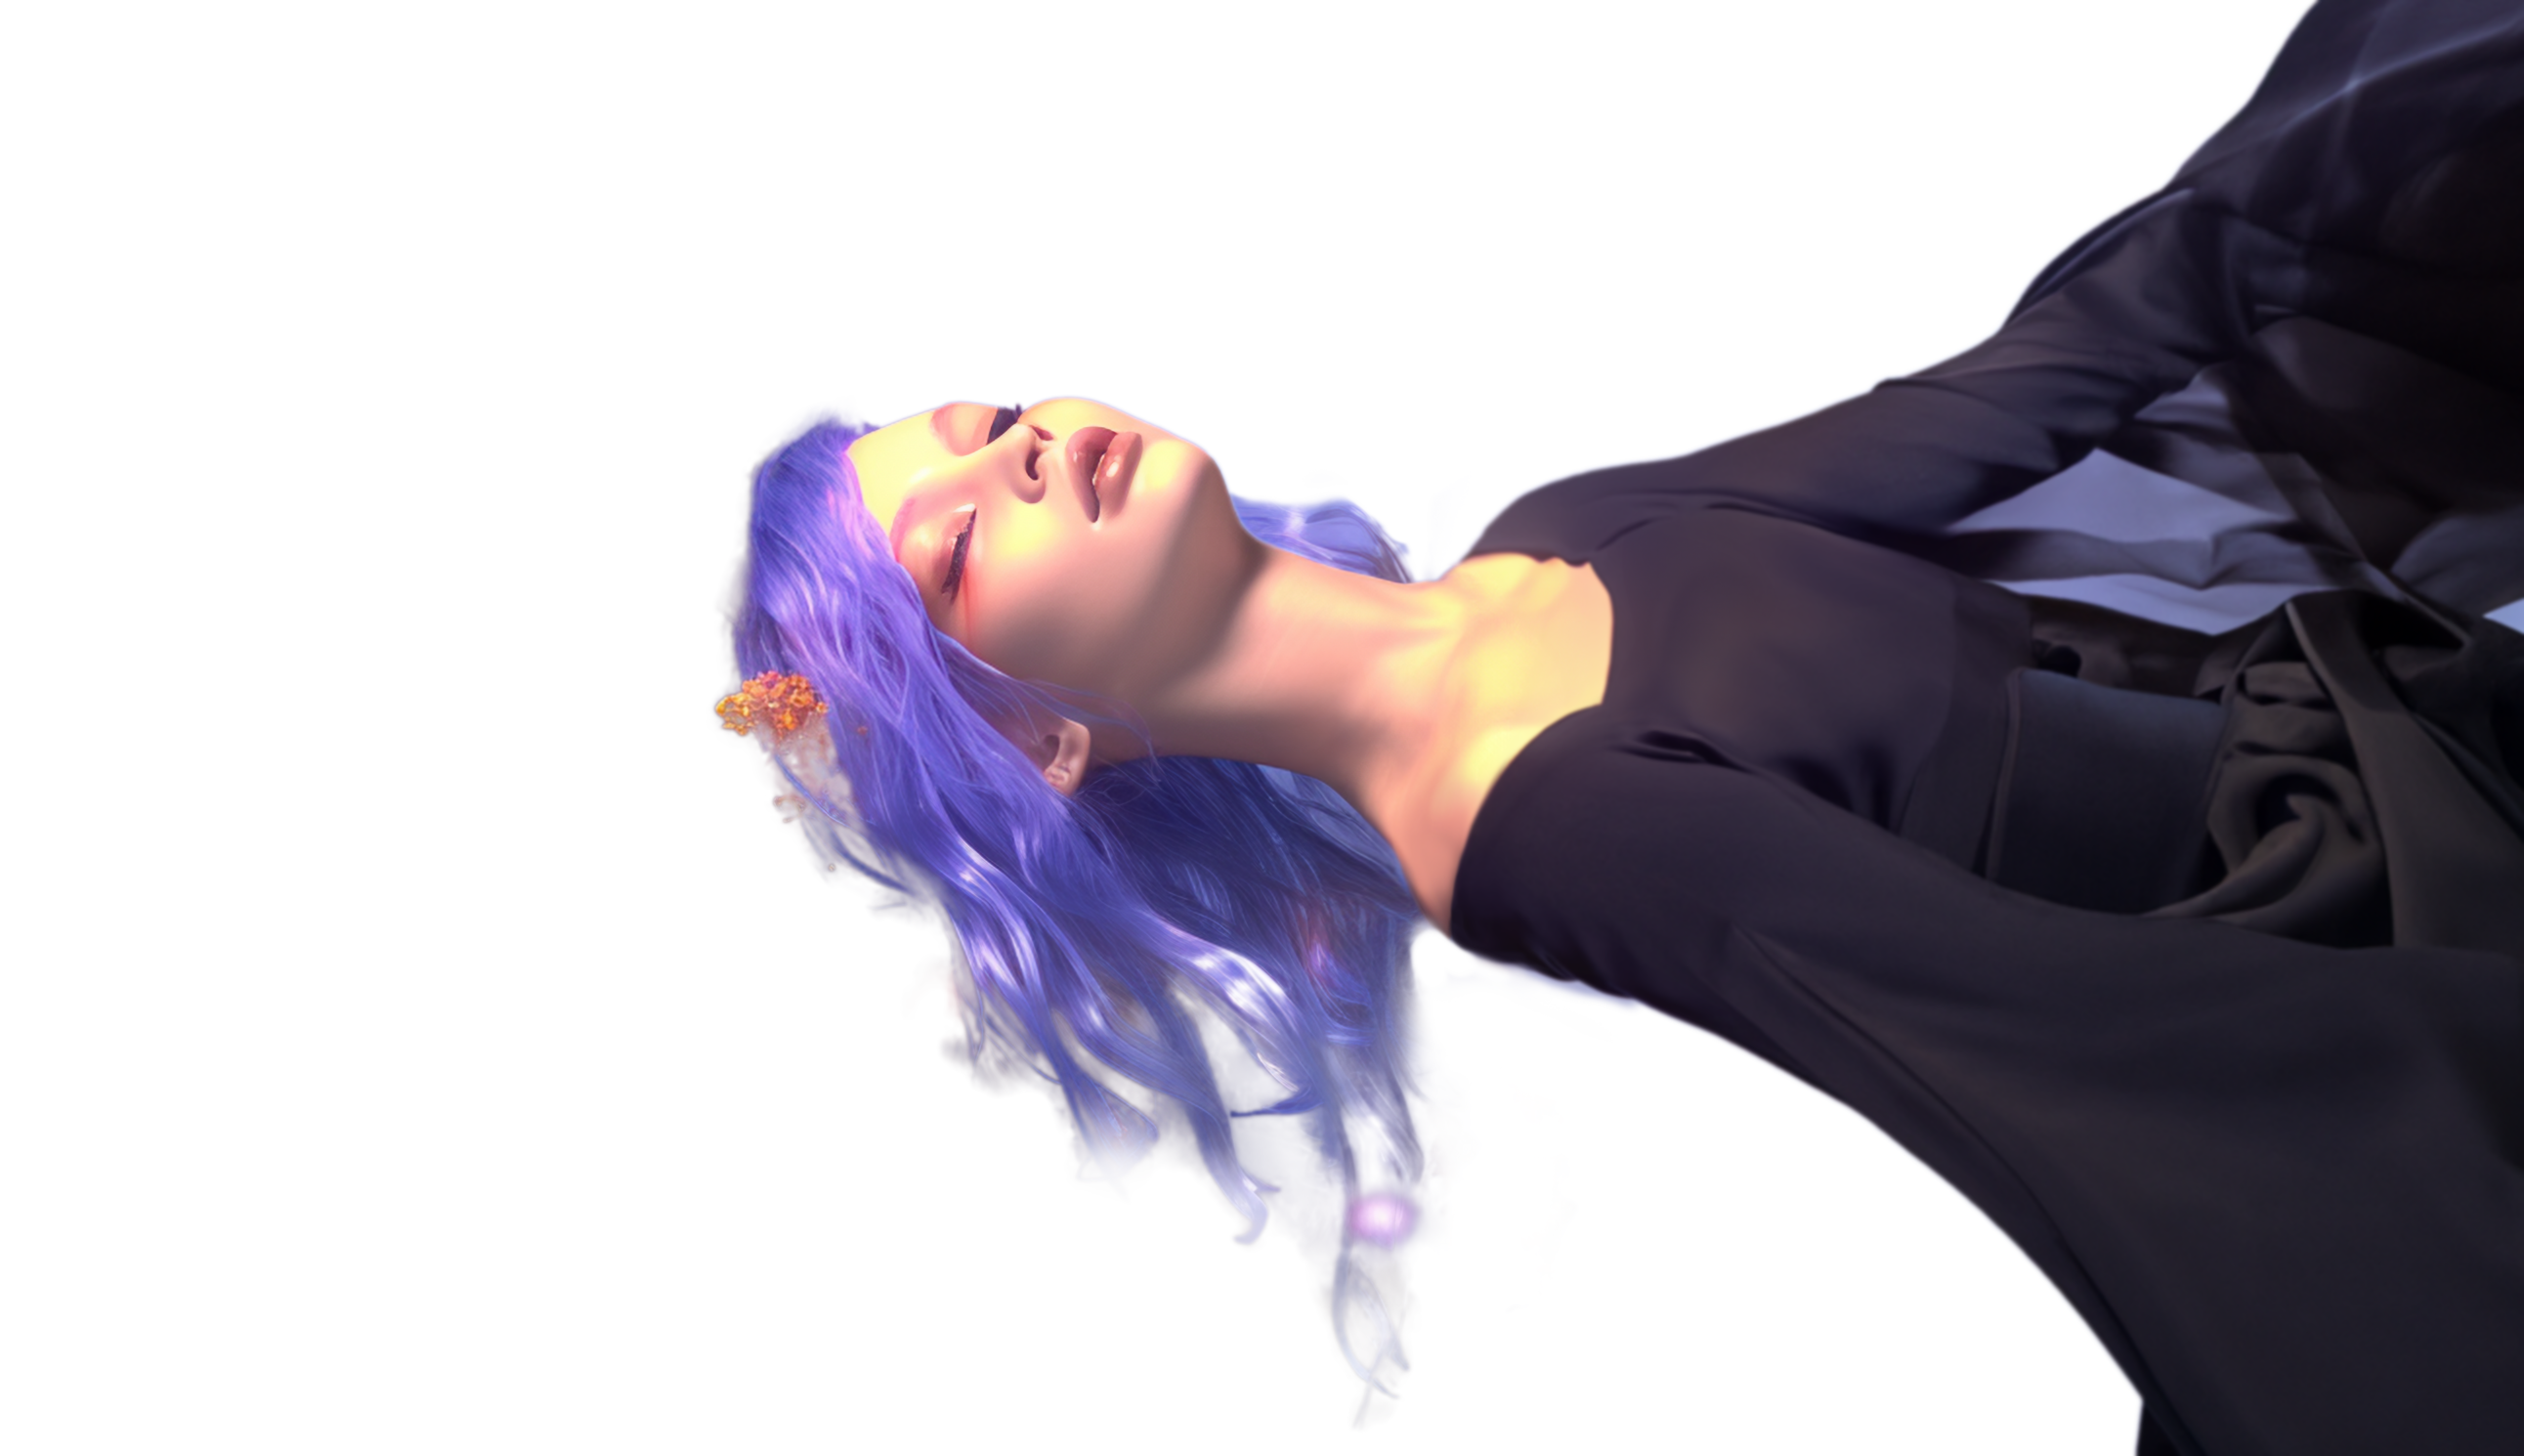 A floating woman with purple hair.